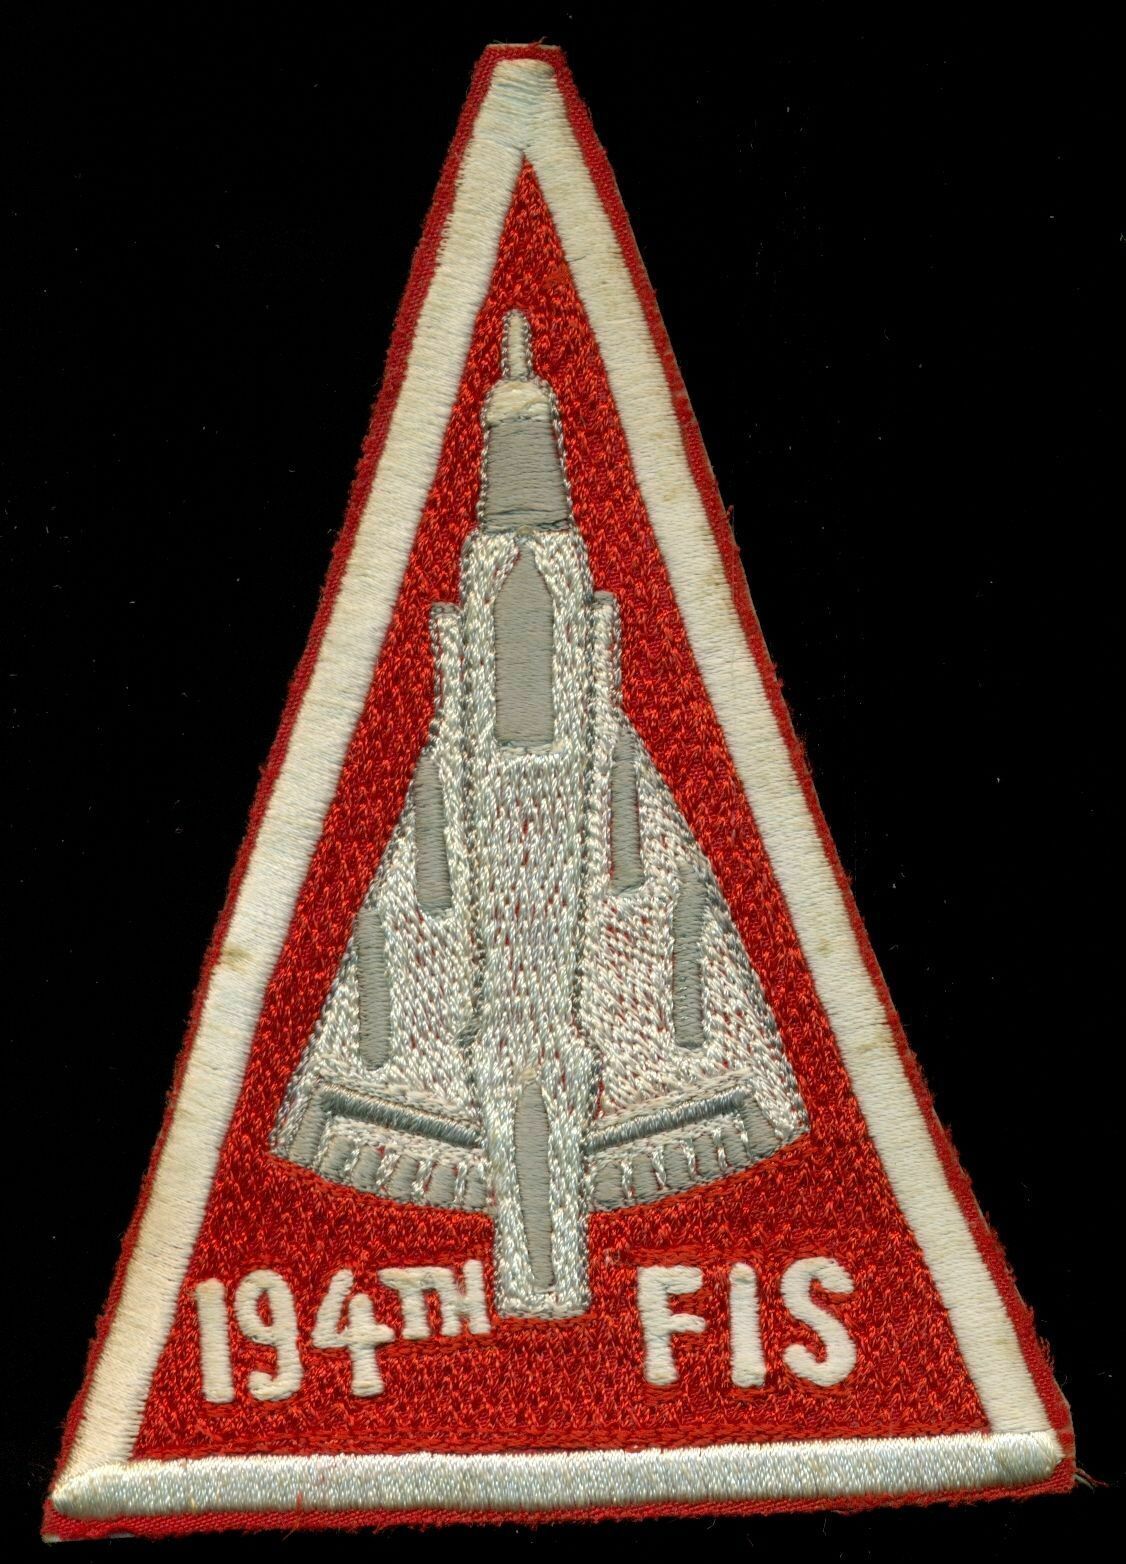 USAF 194th FIS Fighter Interceptor Squadron Patch S-6 